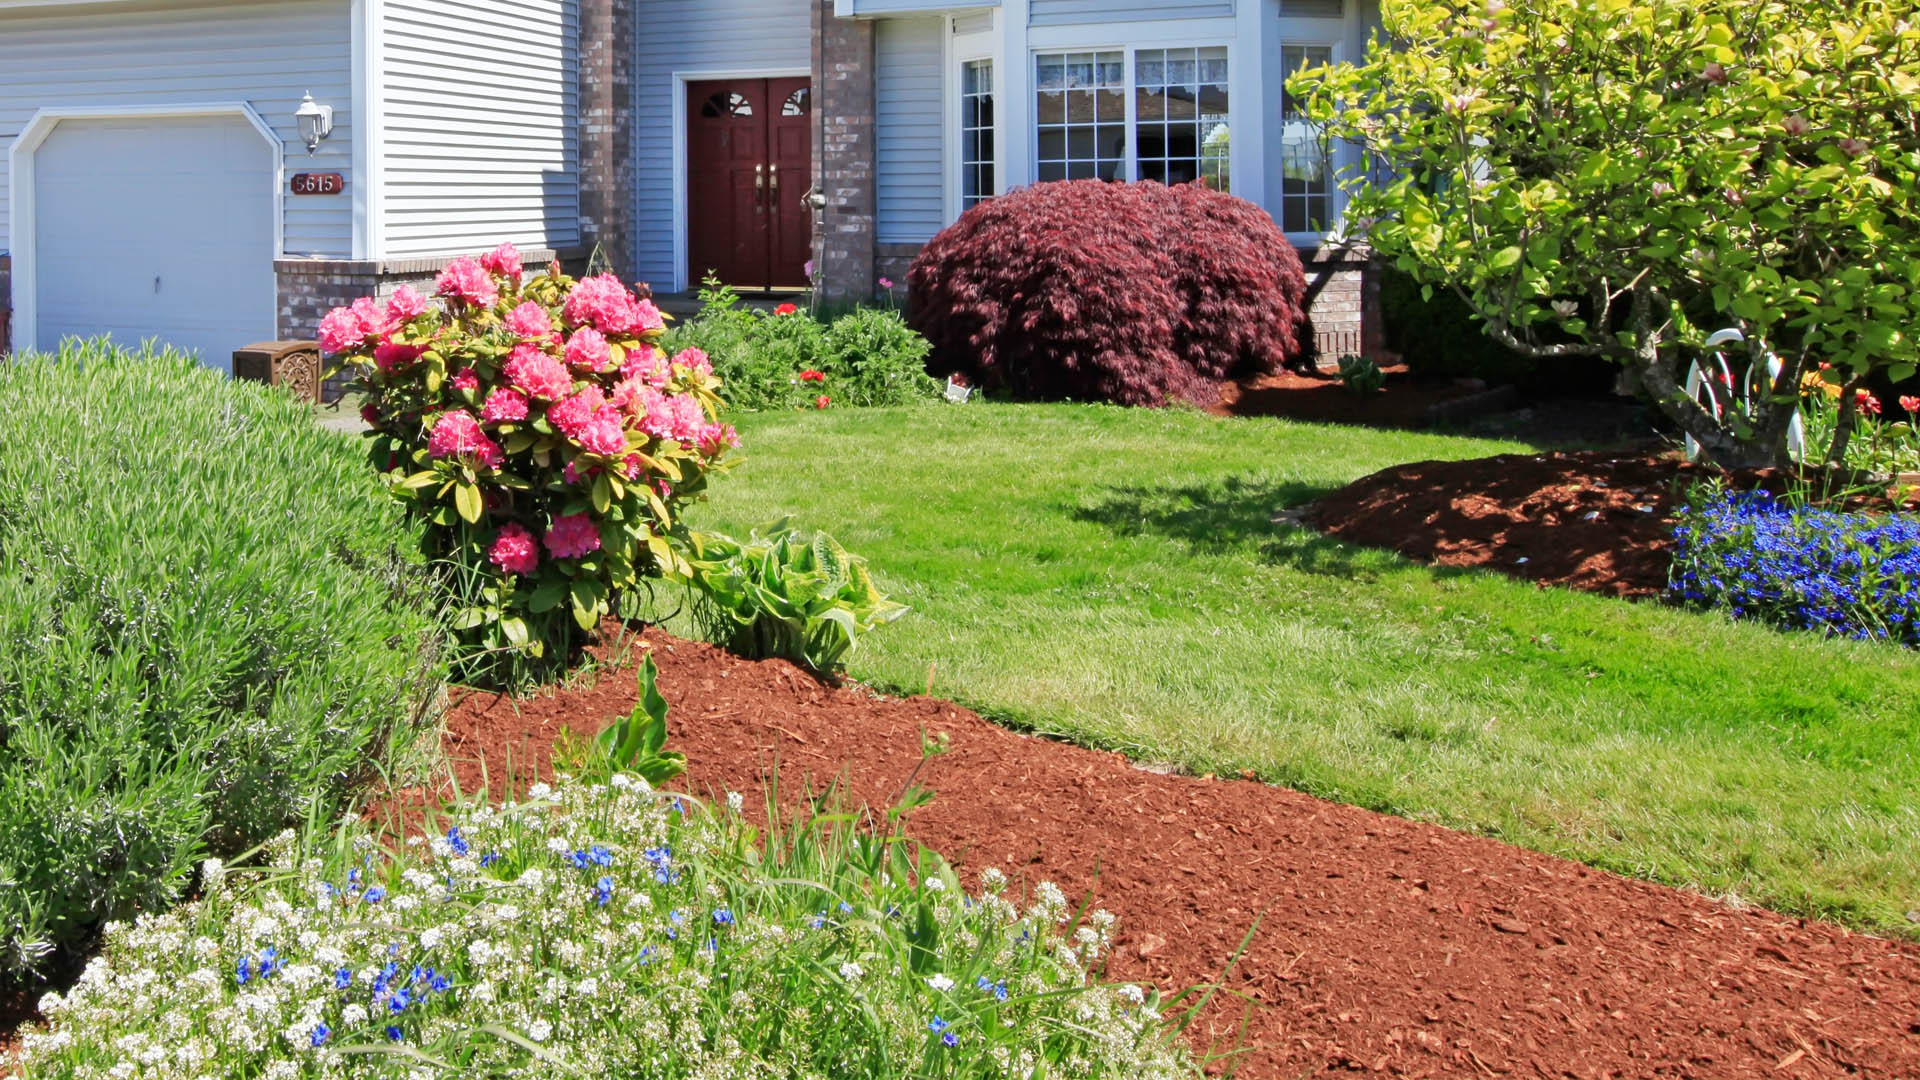 Professional landscaping design and installation service.